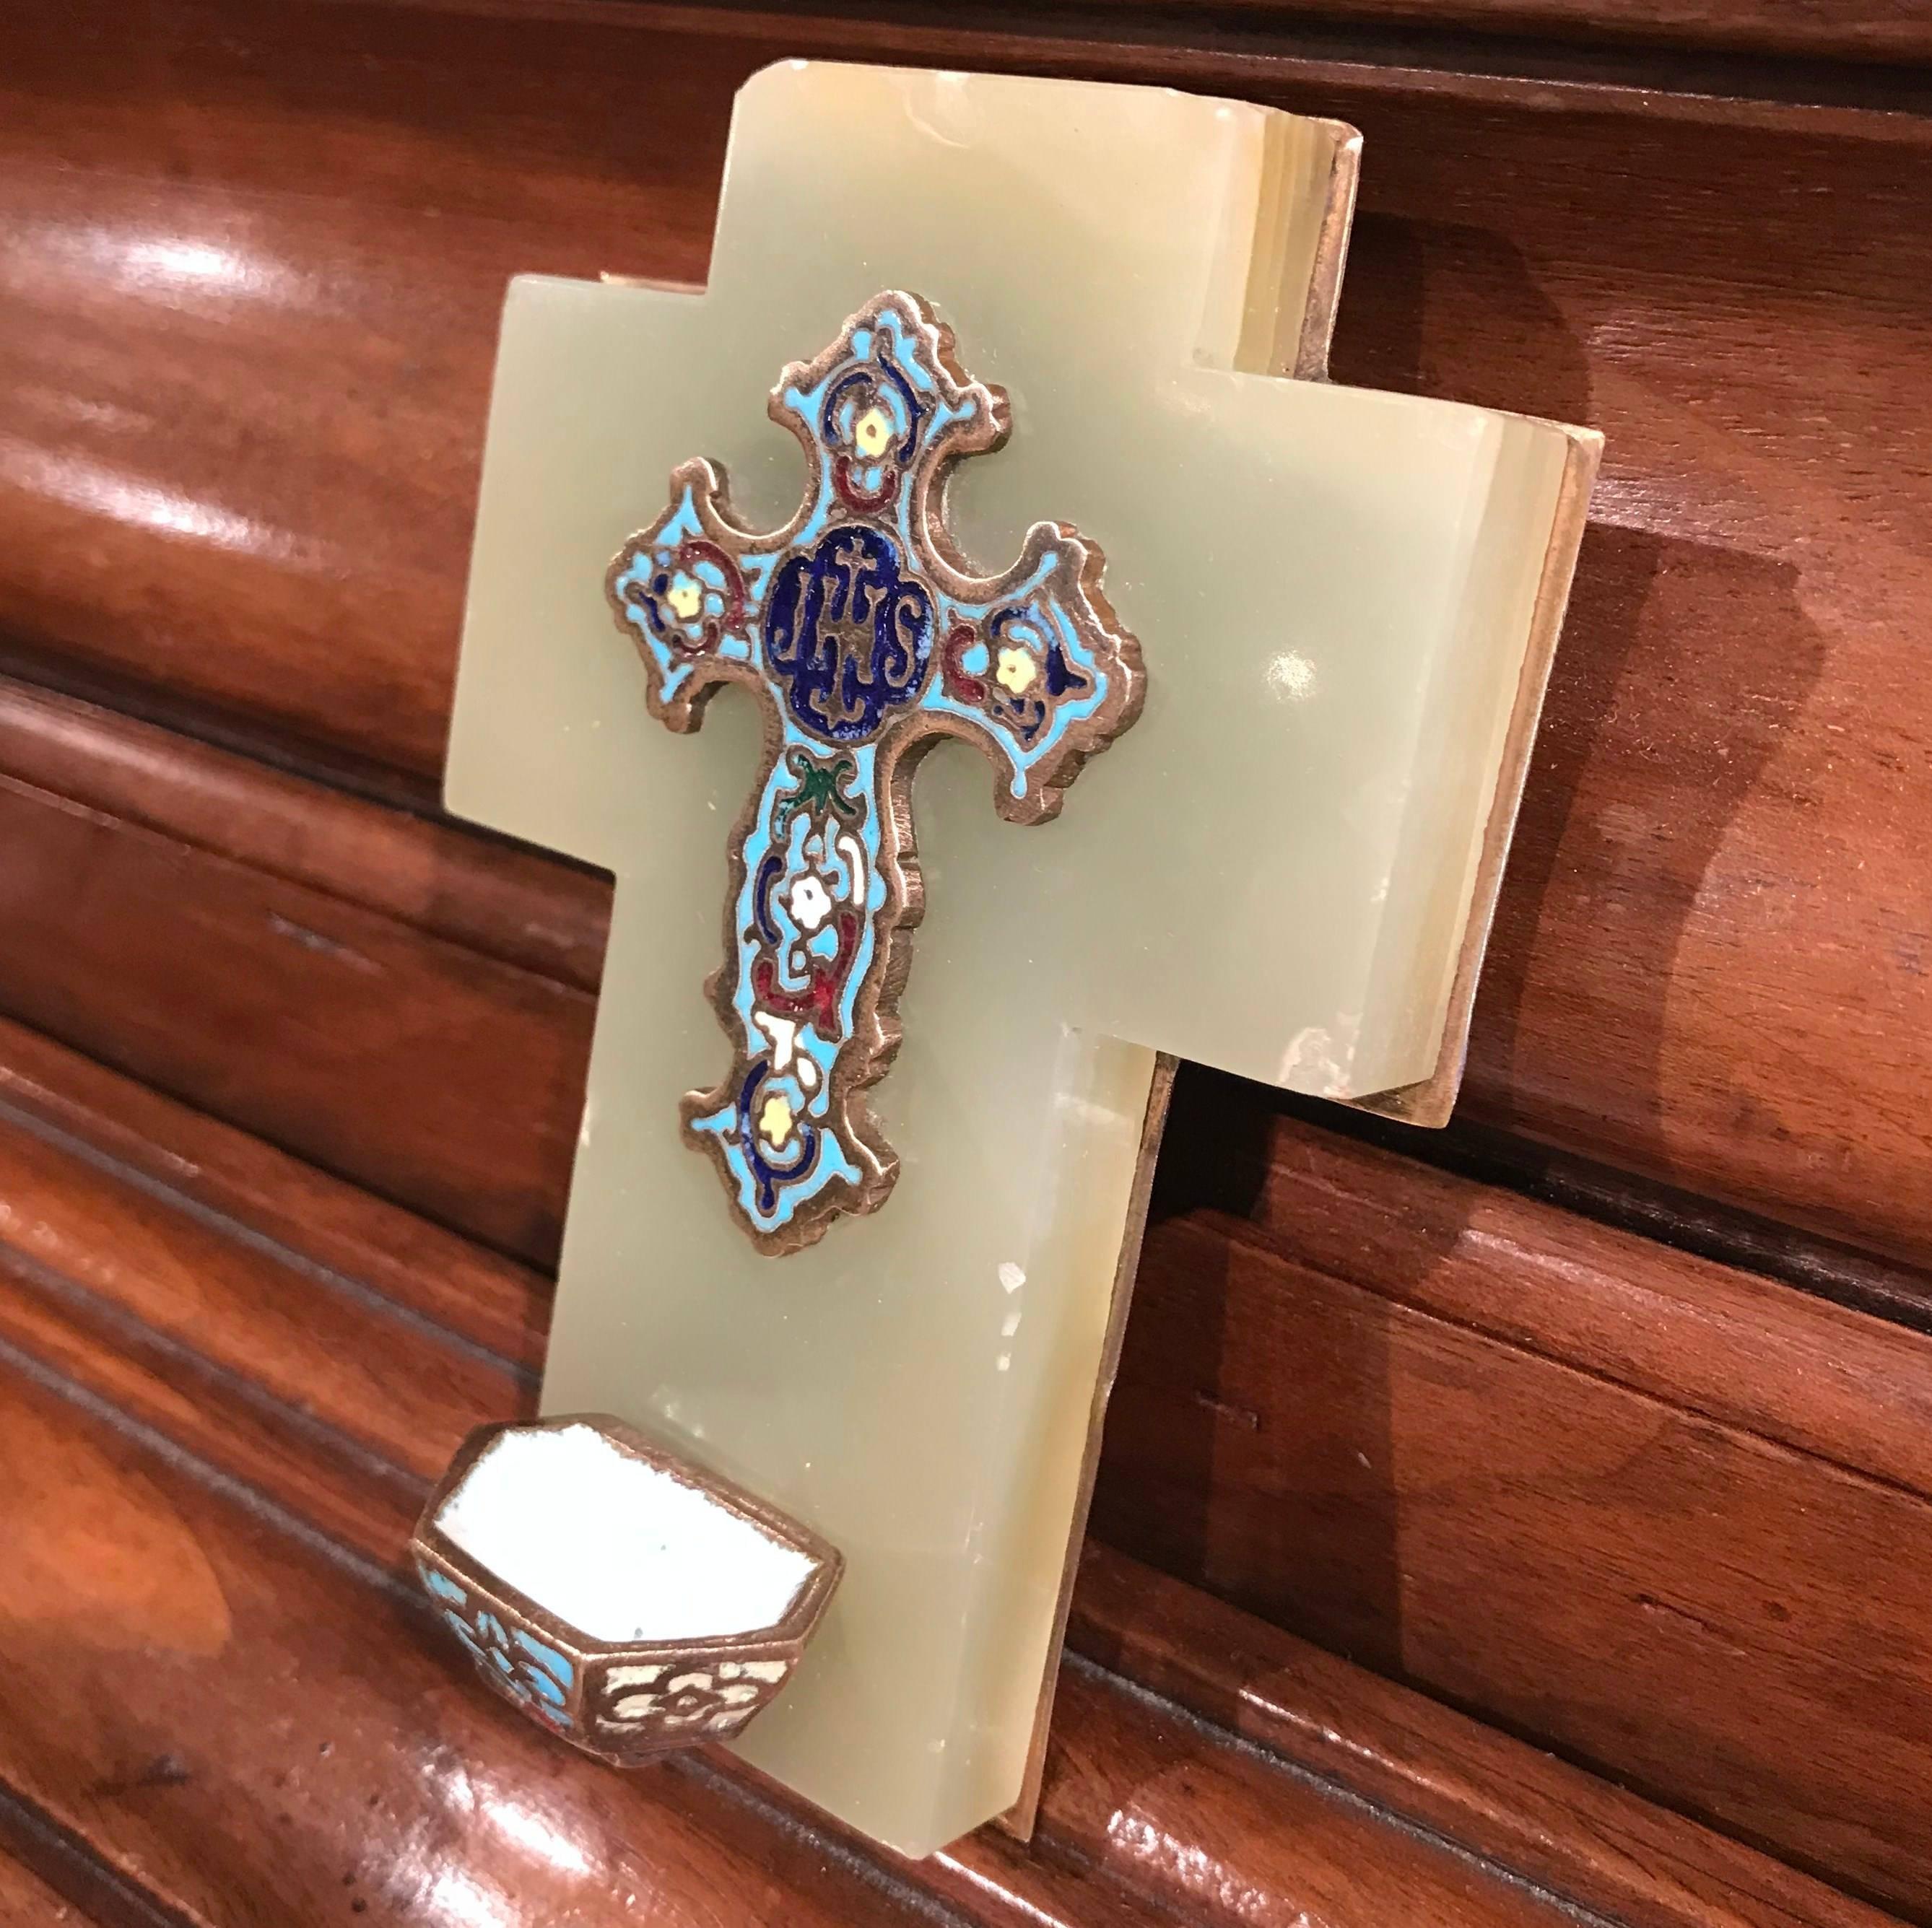 This marble and cloisonné cross with a holy water recipient was created in France, circa 1880. The beautiful, antique piece has intricate cloisonné work with additional enamel, stone and bronze elements. The embellished cross is set on a simple,